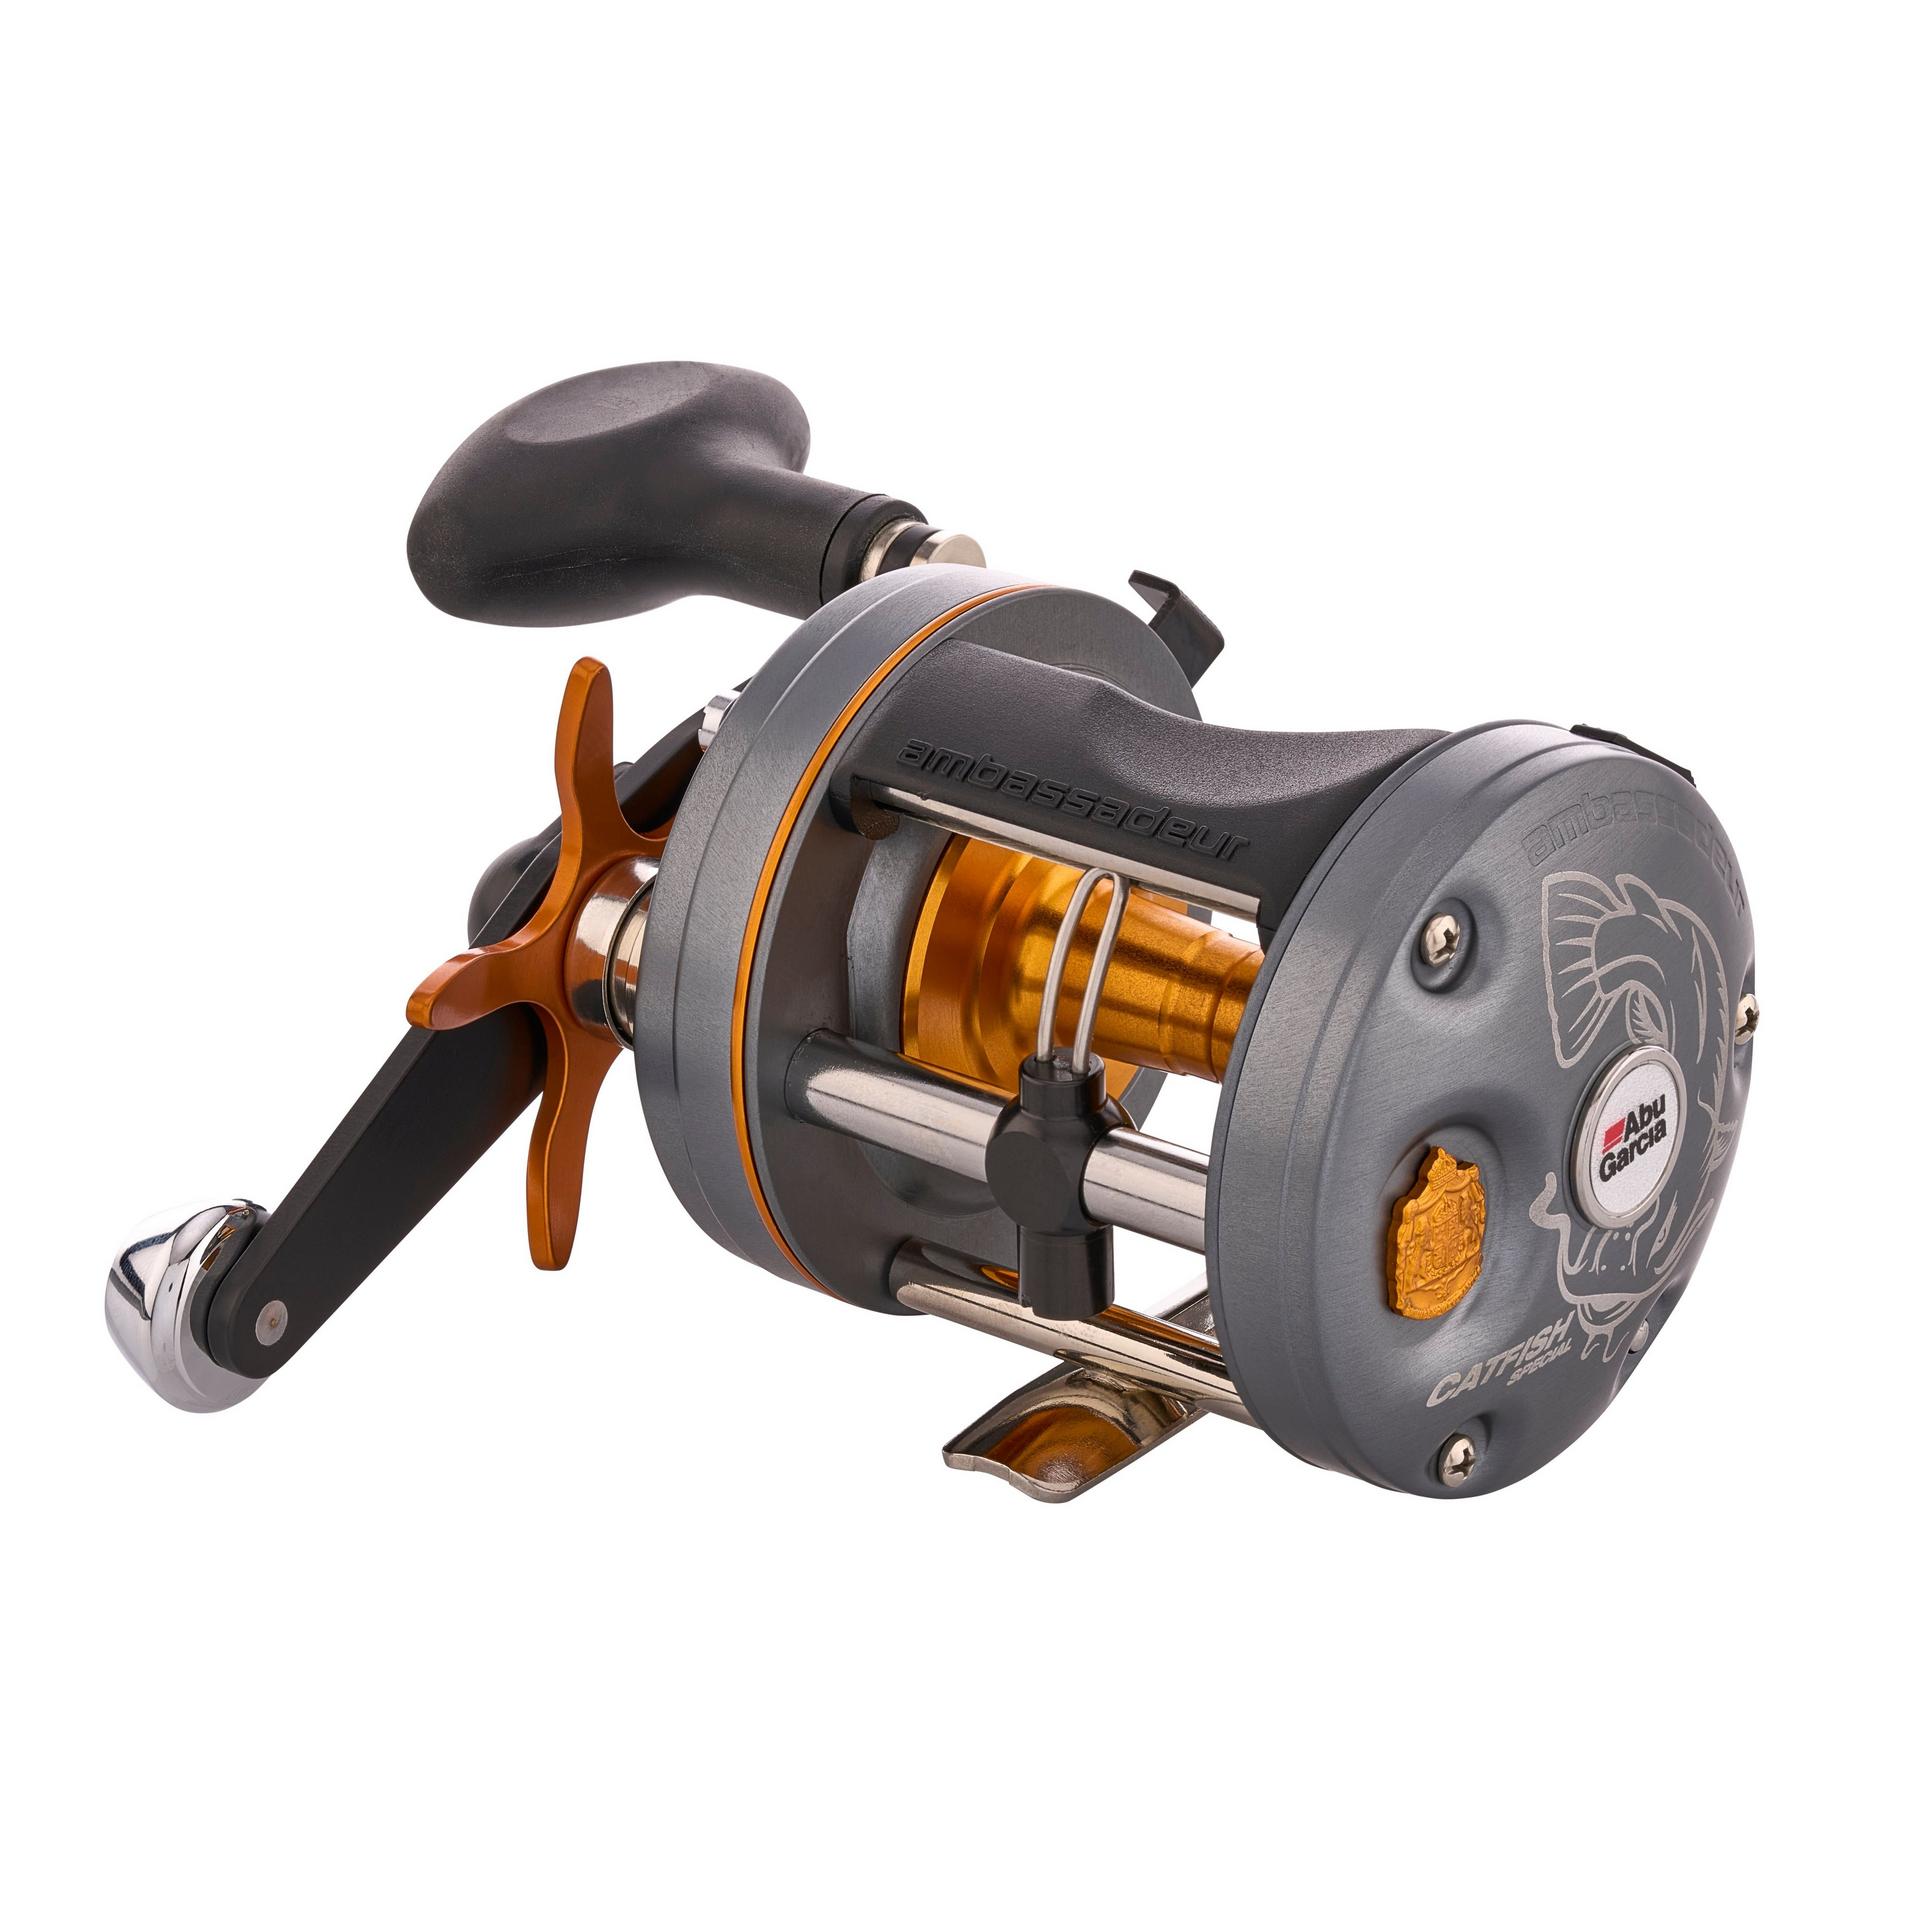 Discount Abu Garcia C3 Catfish Special Round 6500 Reel Size With